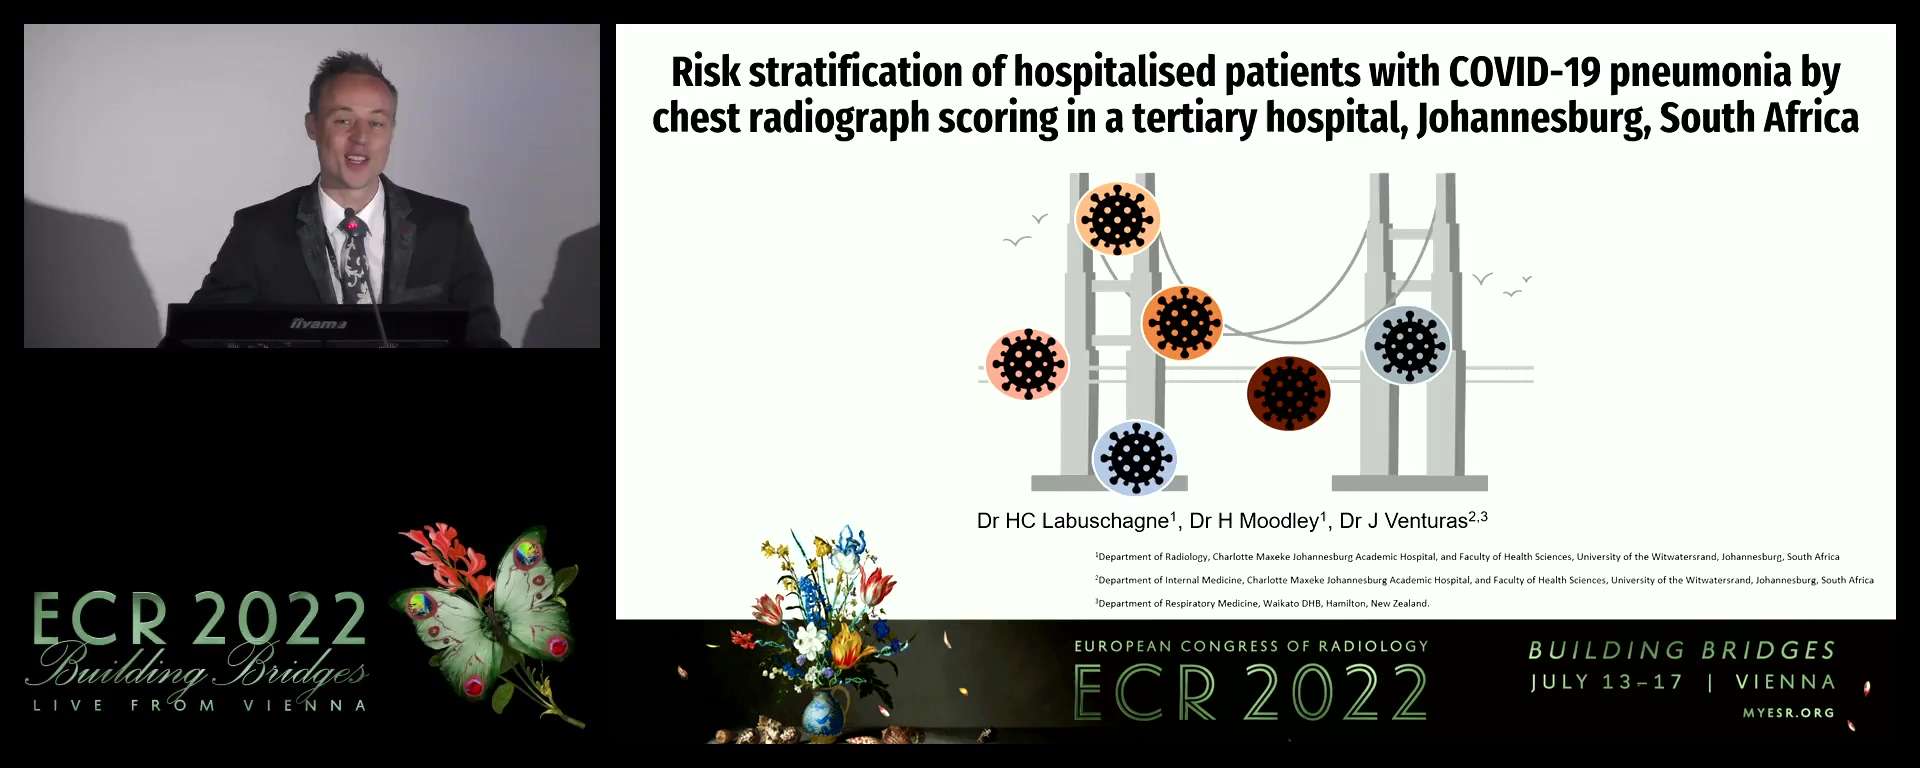 Risk stratification of hospitalised patients with COVID-19 pneumonia by chest radiograph scoring in a tertiary hospital in Johannesburg, South Africa - Hendrik Labuschagne, Johannesburg / ZA